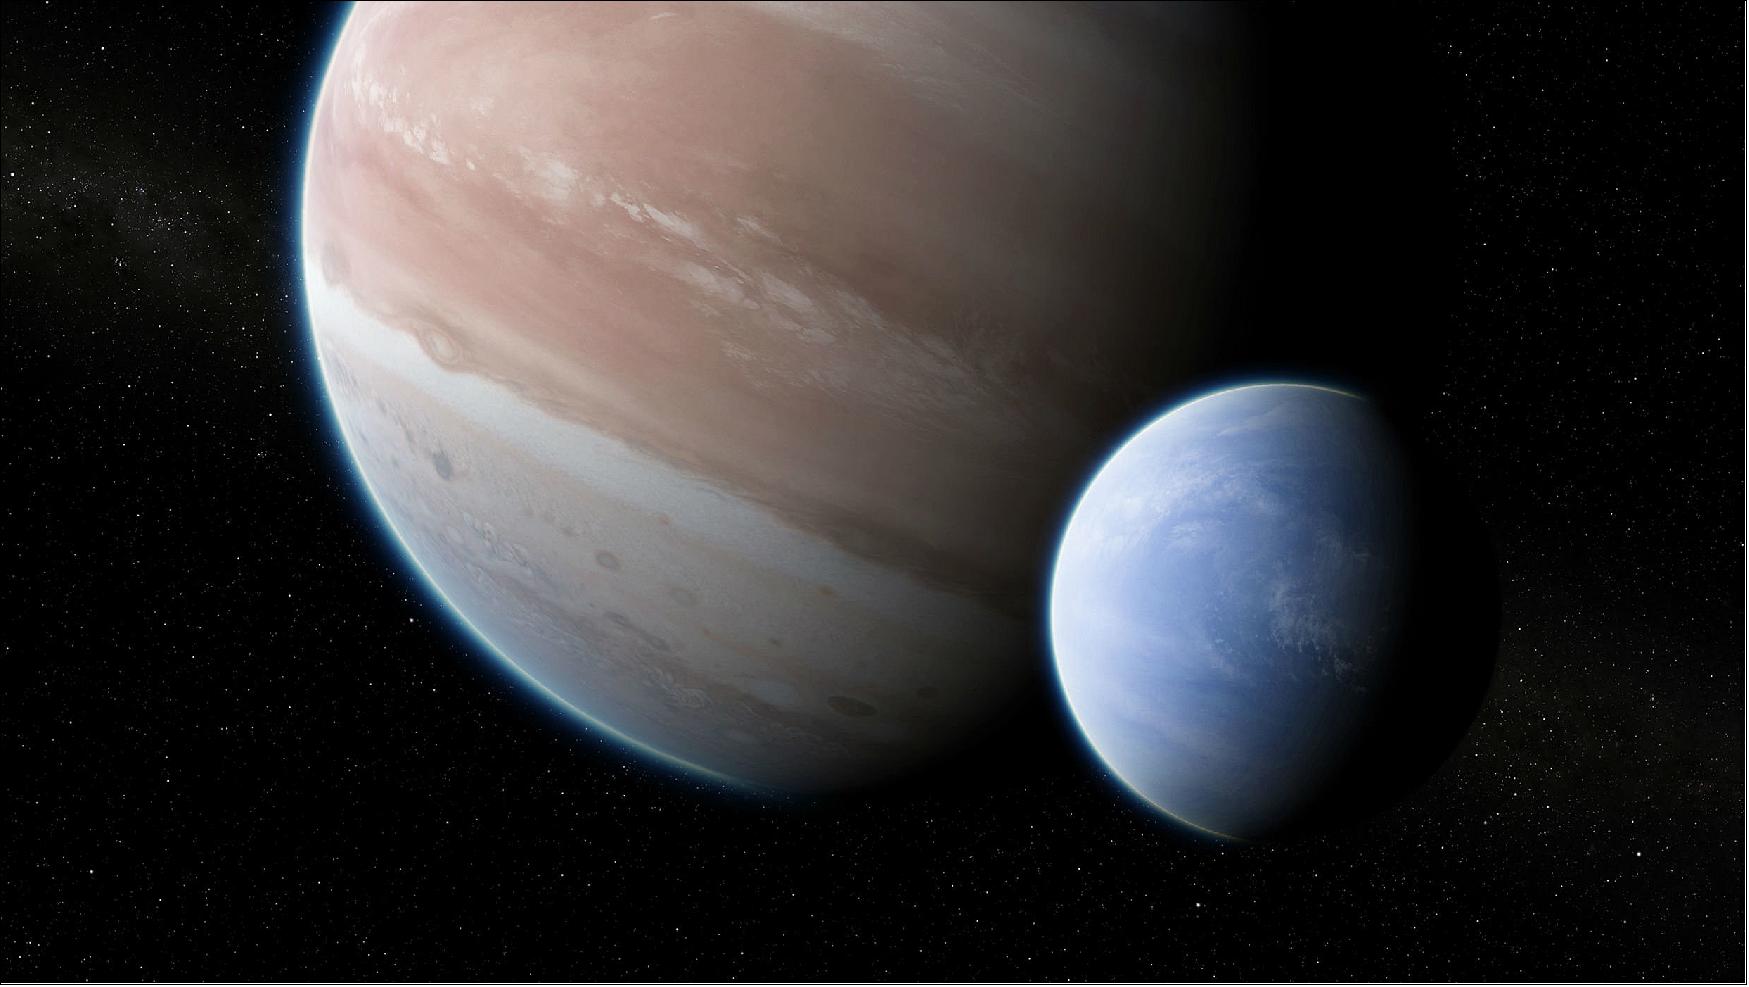 Figure 18: Artist's impression of the exoplanet Kepler-1625b, transiting the star, with the candidate exomoon in tow (image credit: Dan Durda)